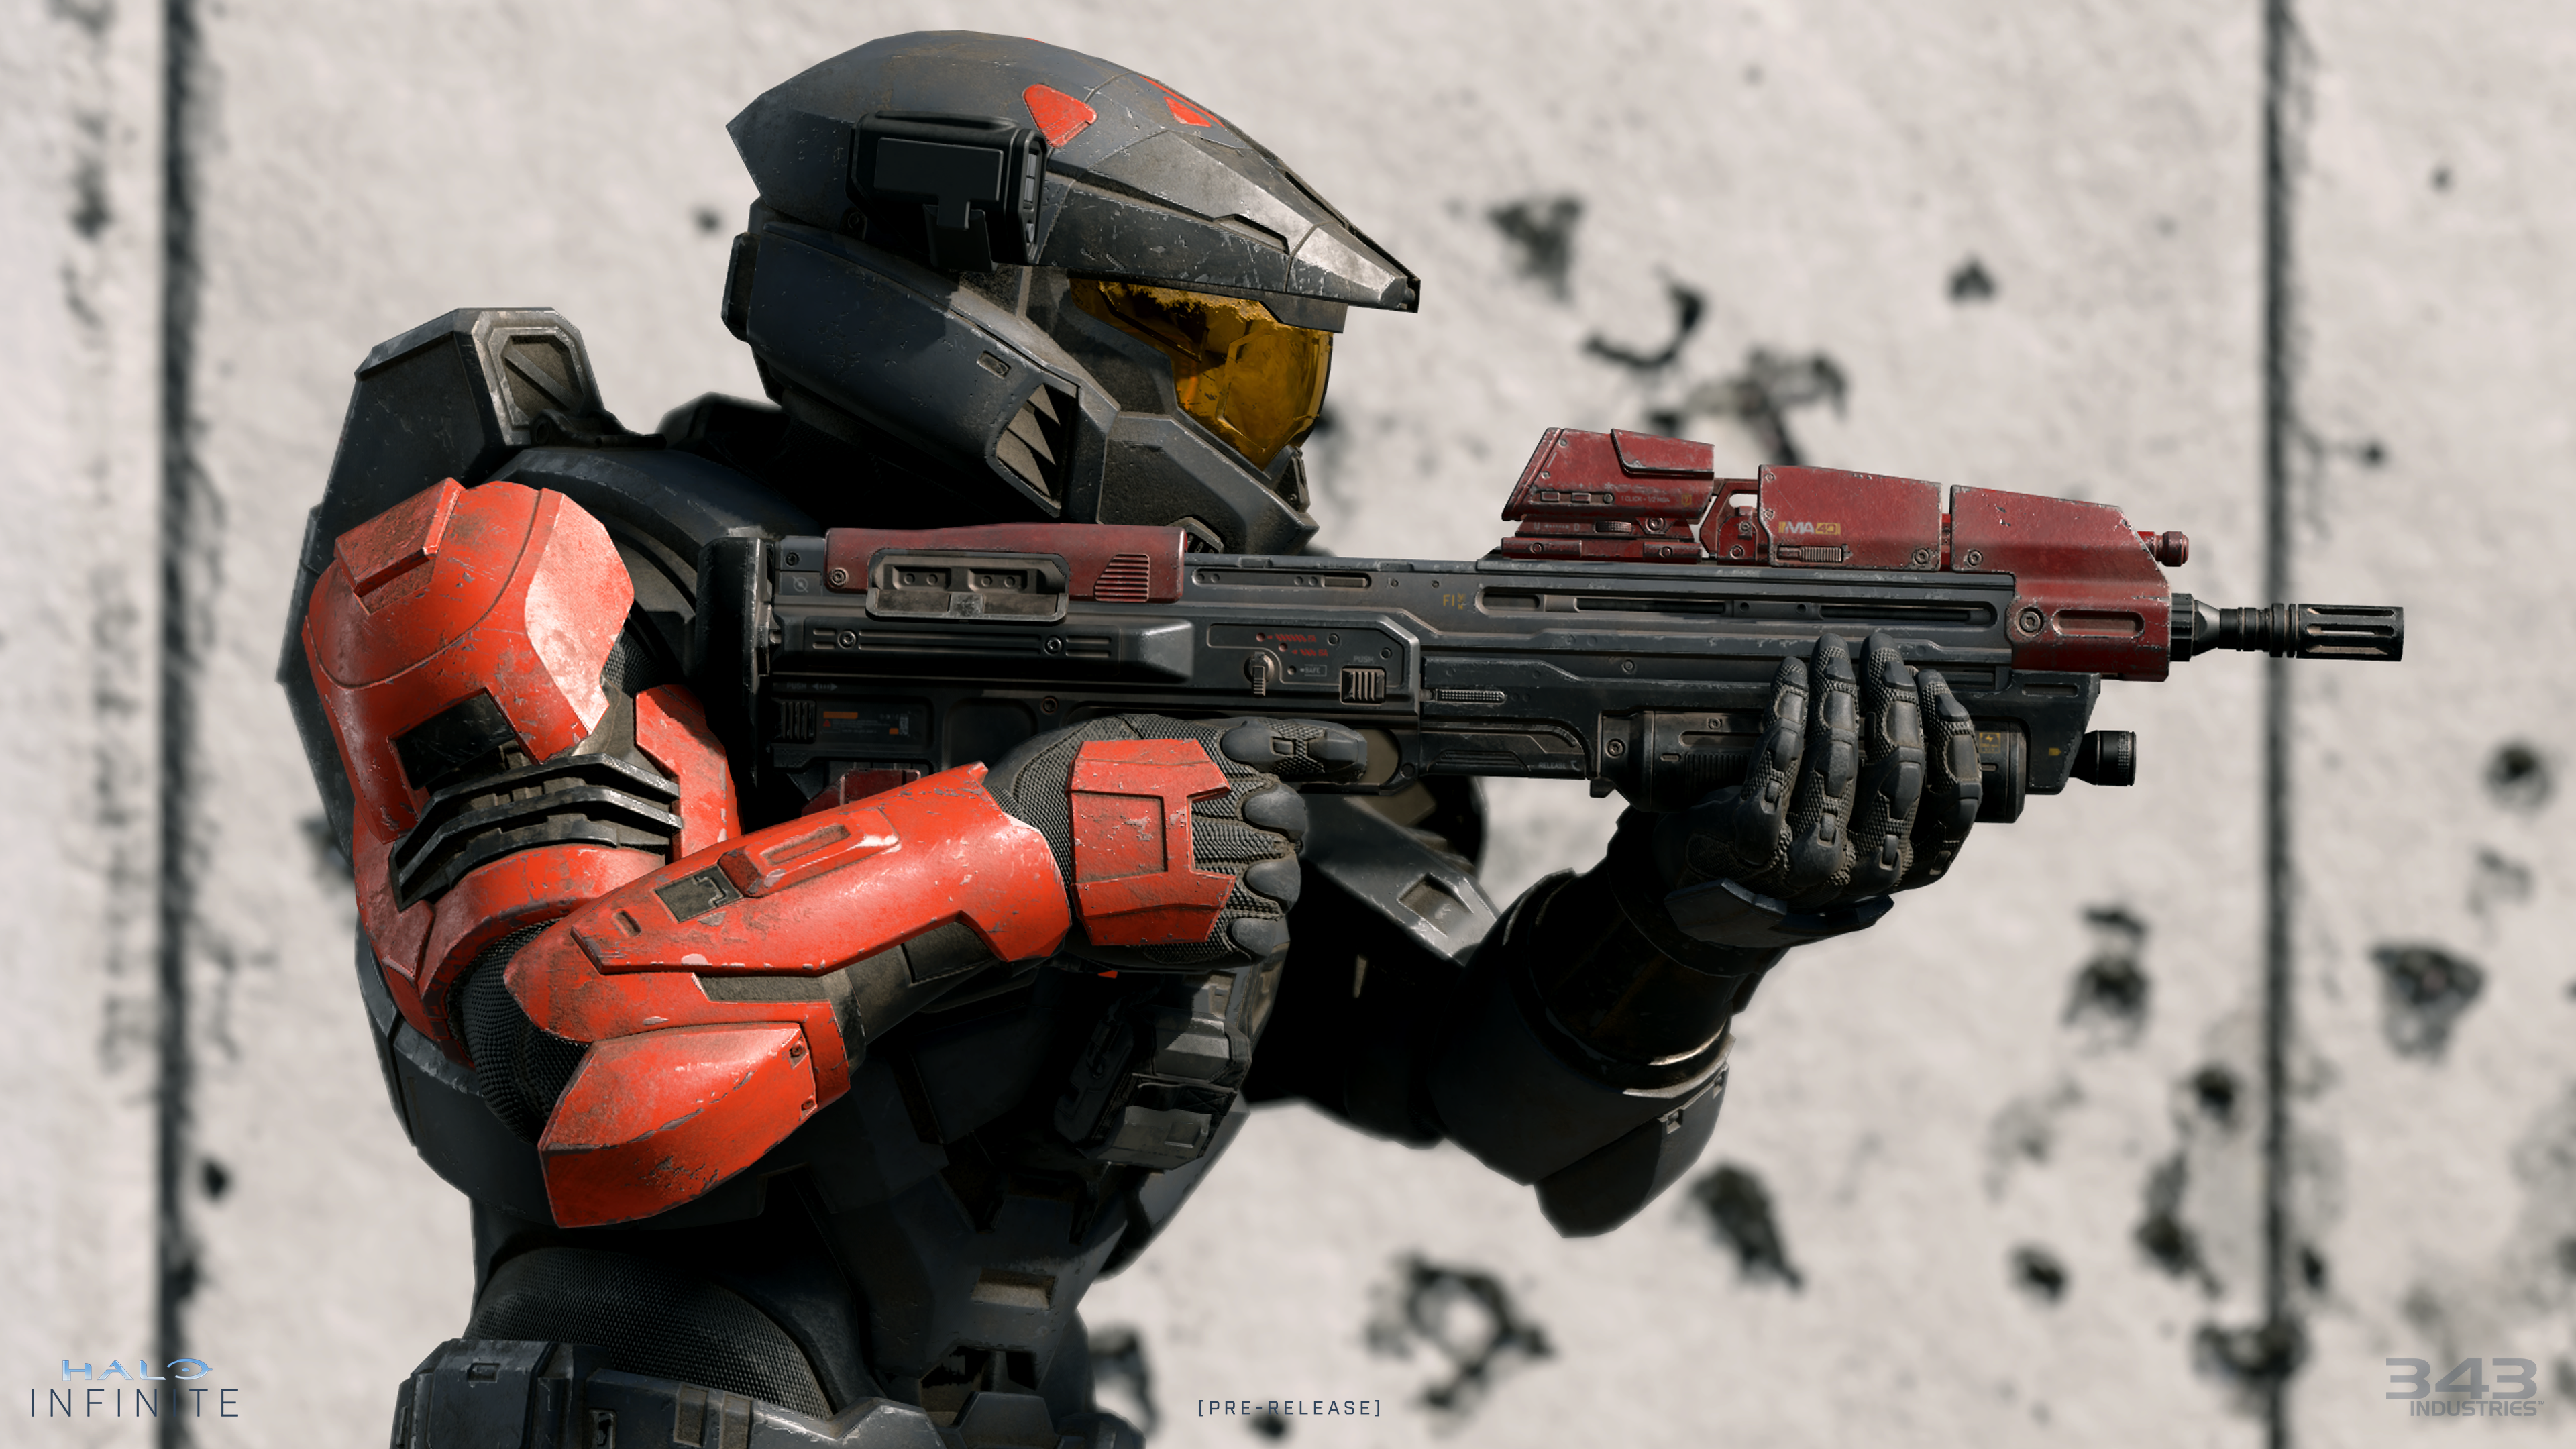 Halo: Reach impressions: The fight returns